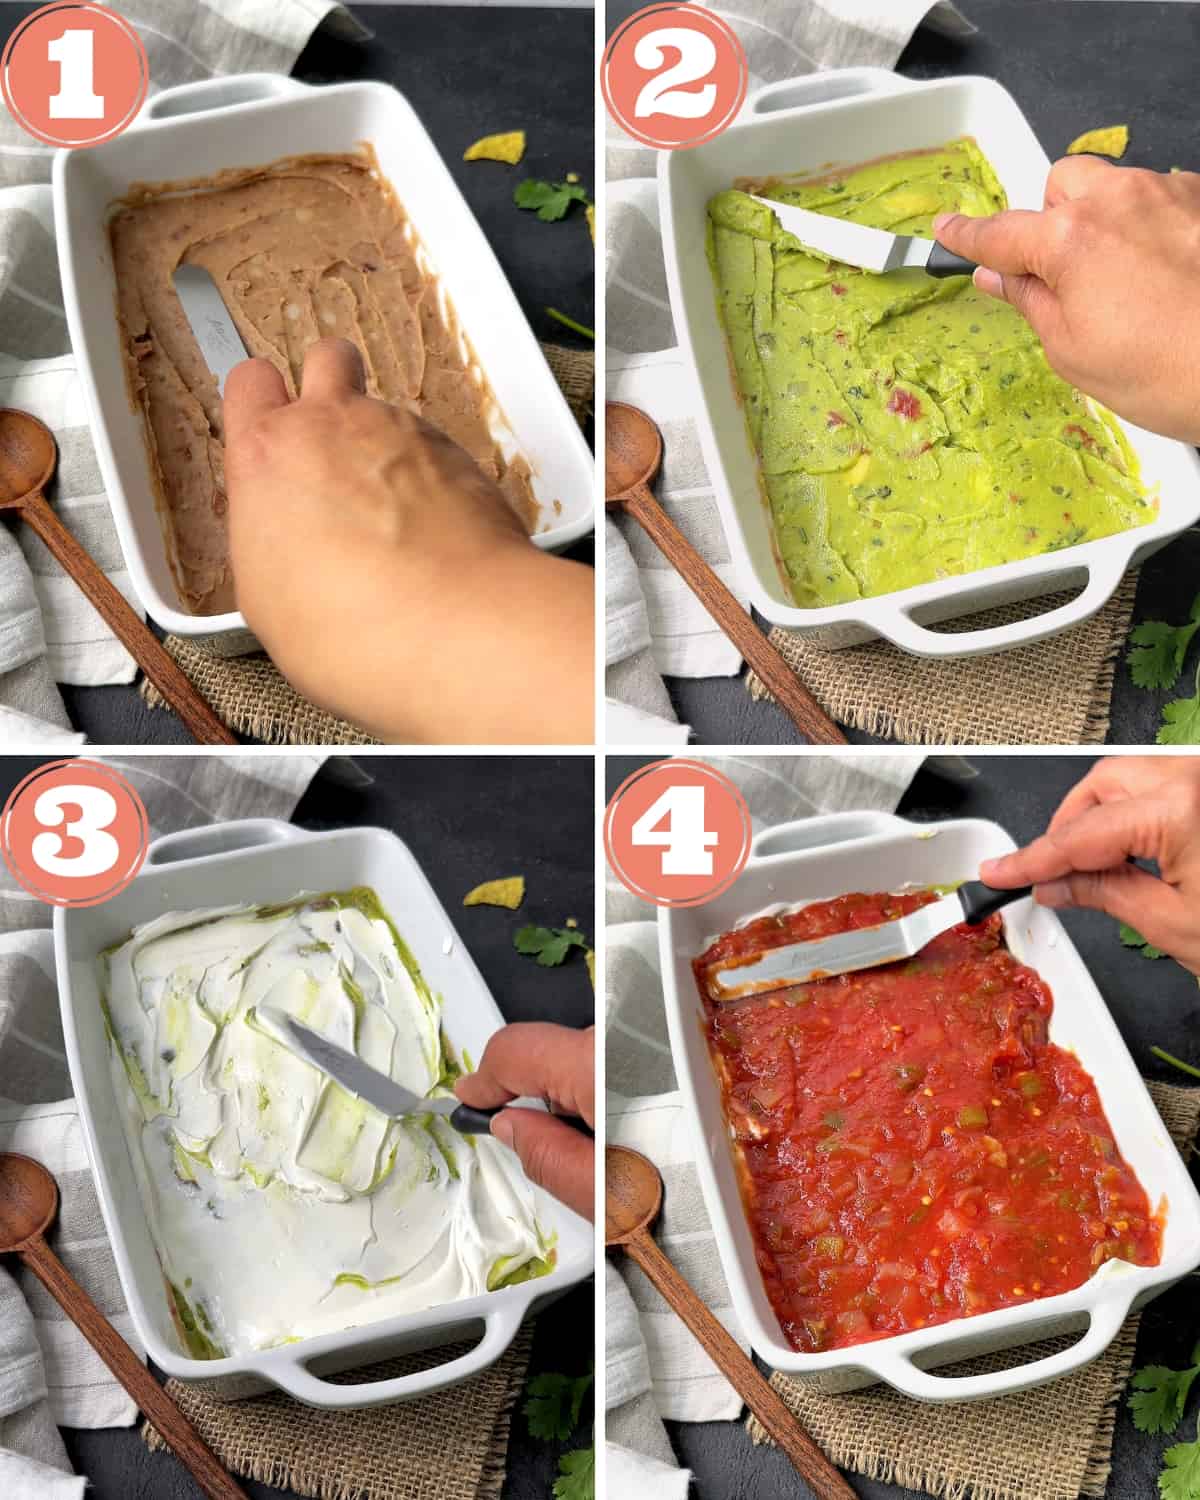 4-image grid showing steps 1 to 4 layering a mexican dip